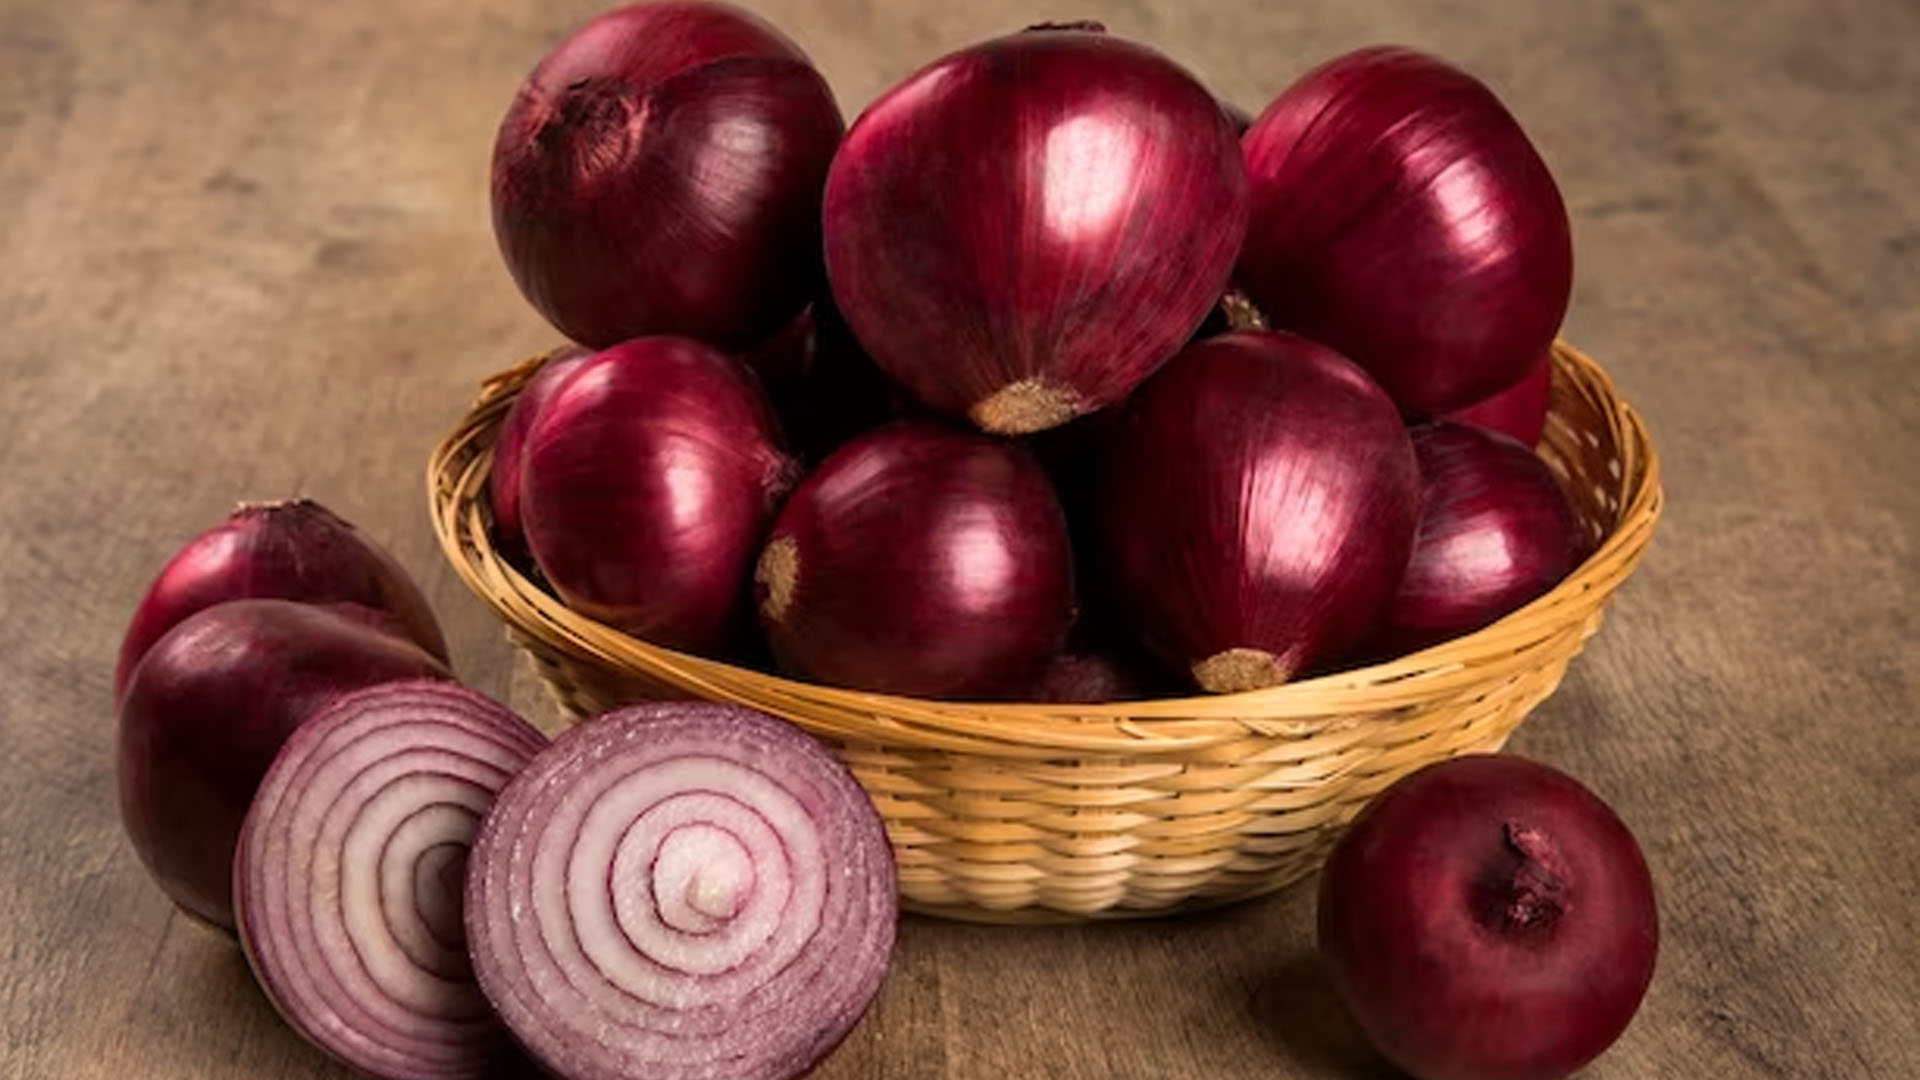 Do Onions have Health Benefits?